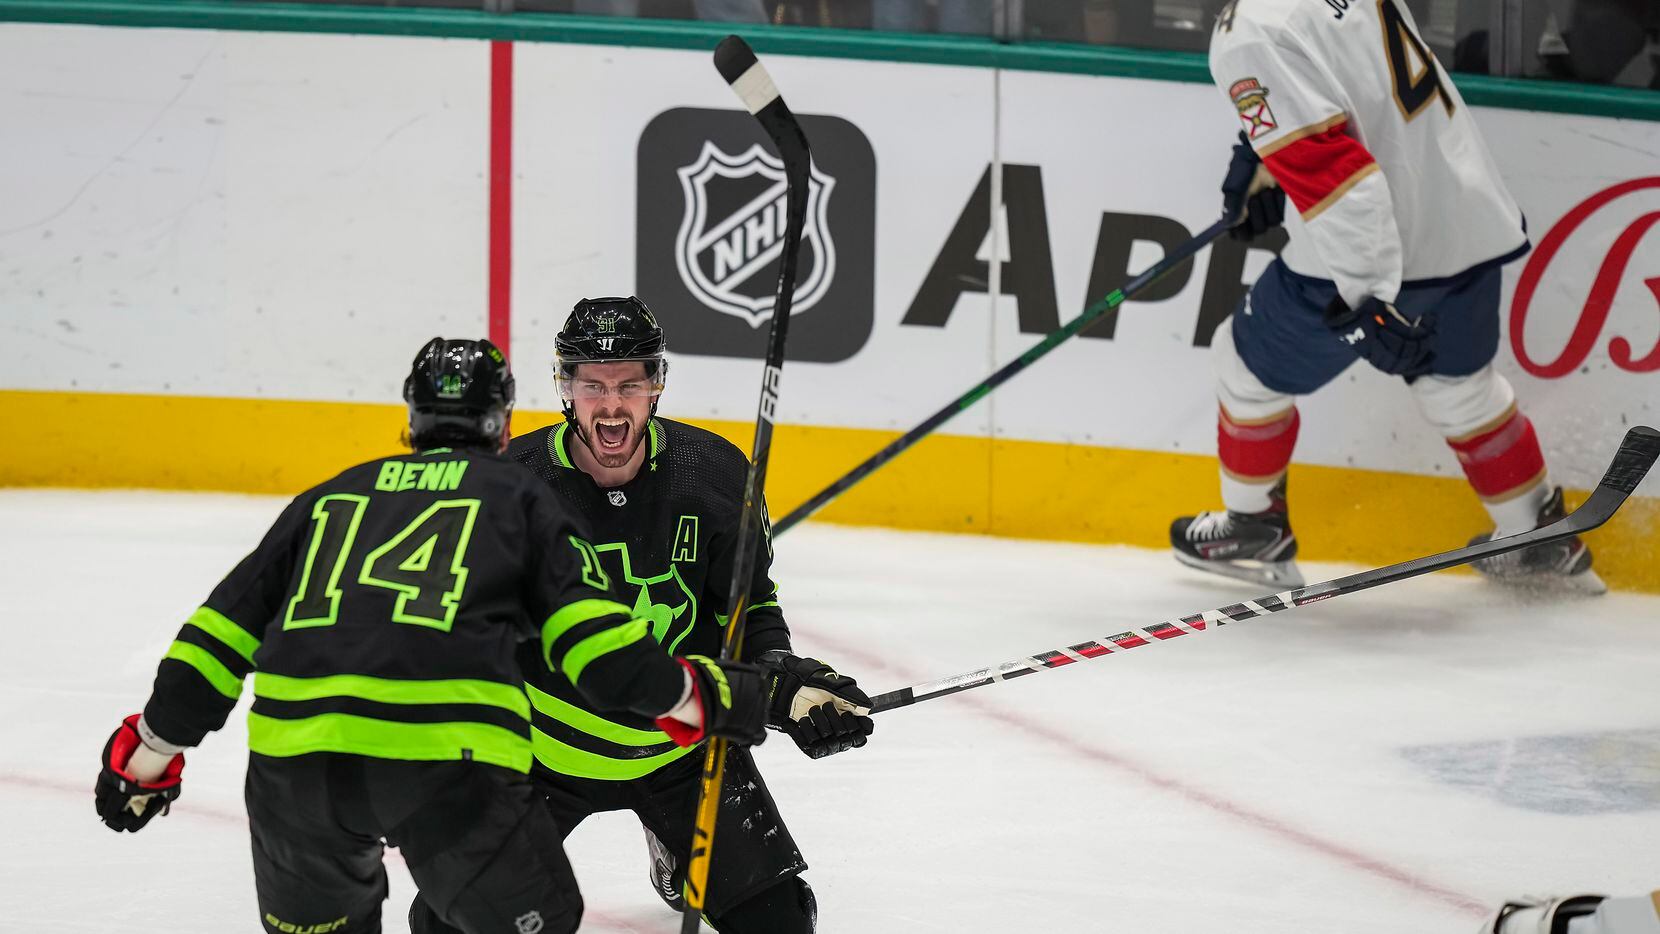 Dallas Stars center Tyler Seguin (91) celebrates with left wing Jamie Benn (14) after scoring during the second period of an NHL hockey game against the Florida Panthers at the American Airlines Center on Thursday, Jan. 6, 2022, in Dallas. (Smiley N. Pool/The Dallas Morning News)